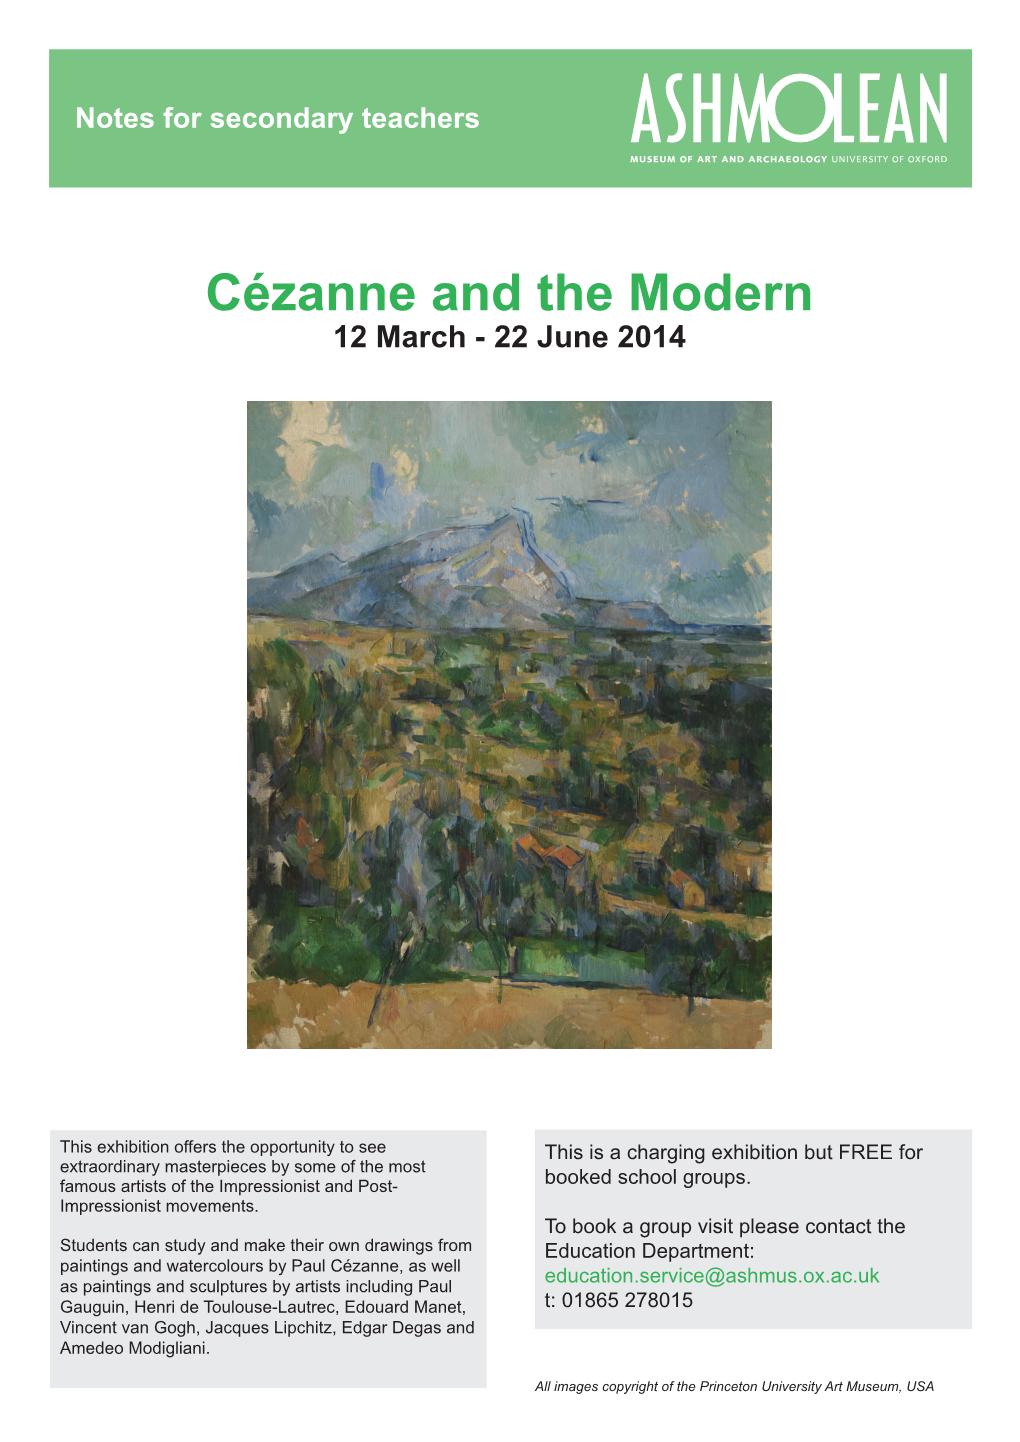 Cézanne and the Modern 12 March - 22 June 2014